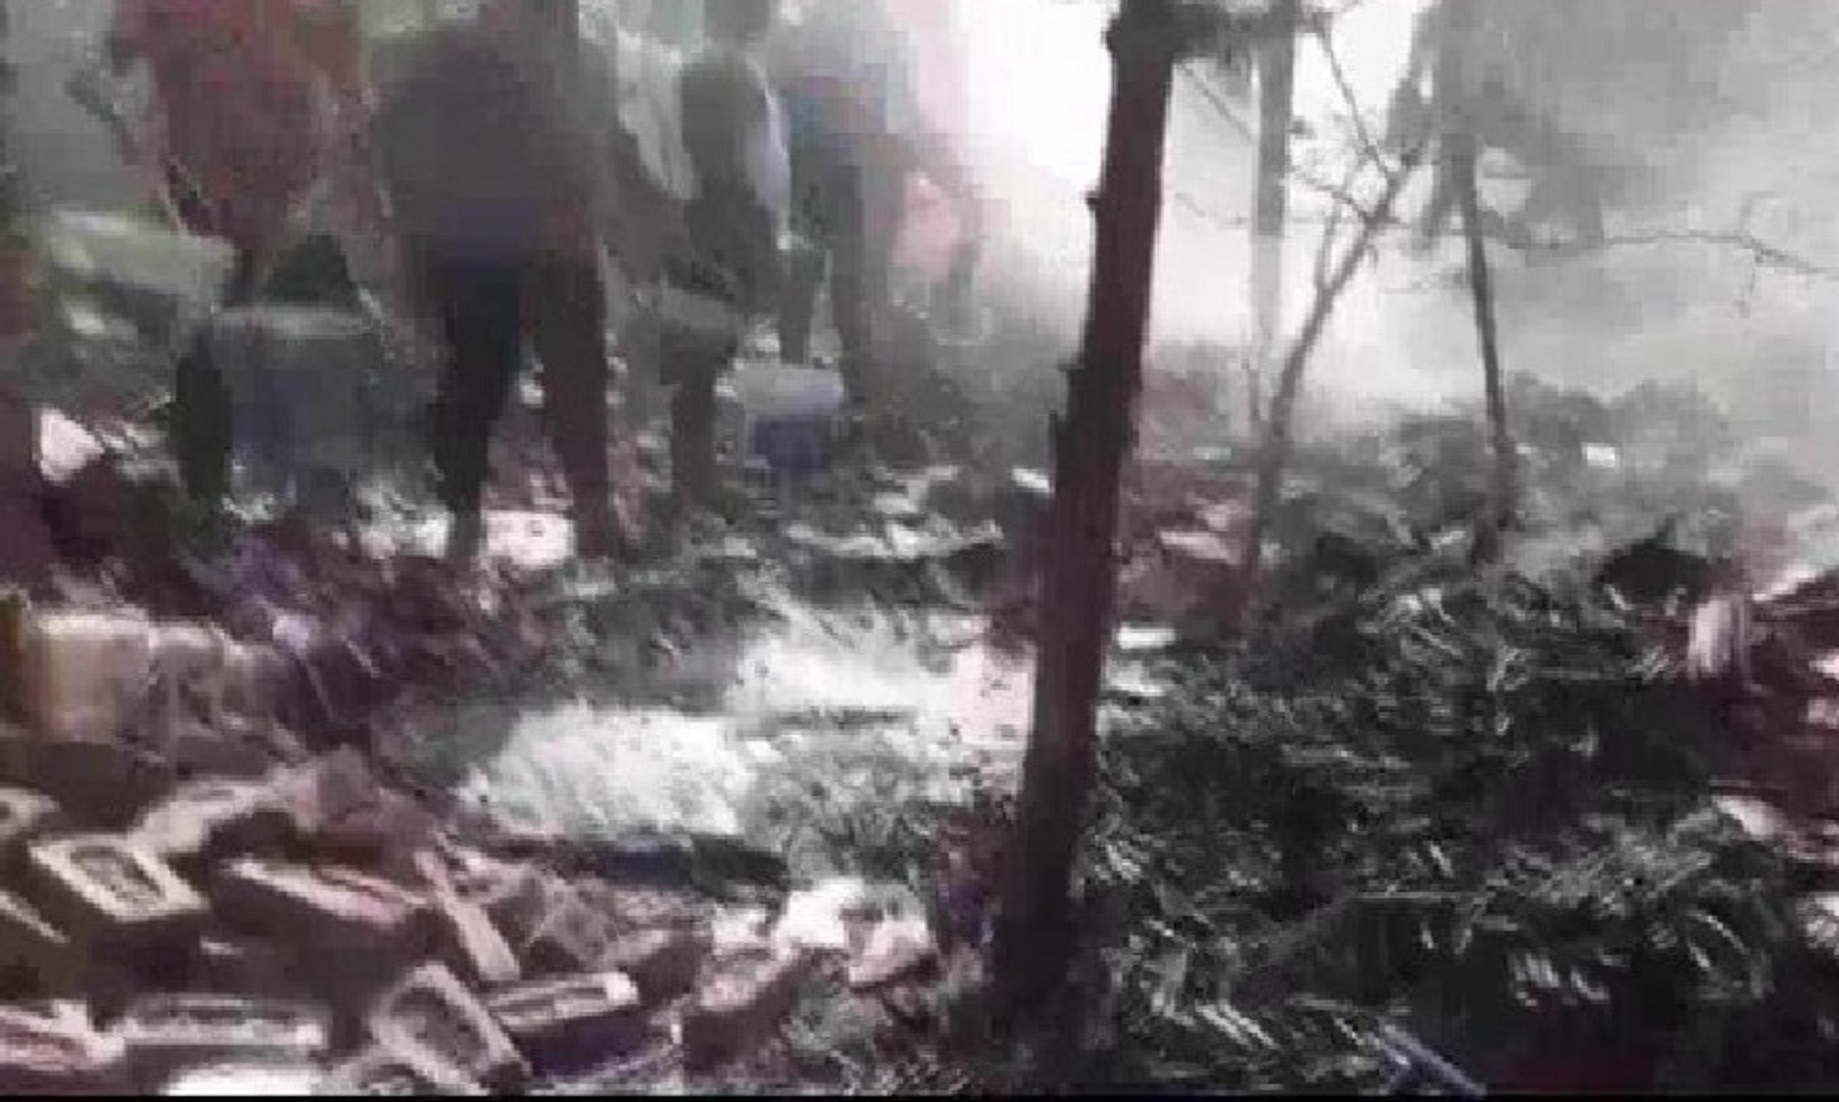 Seven People Killed In Factory Blast In North India